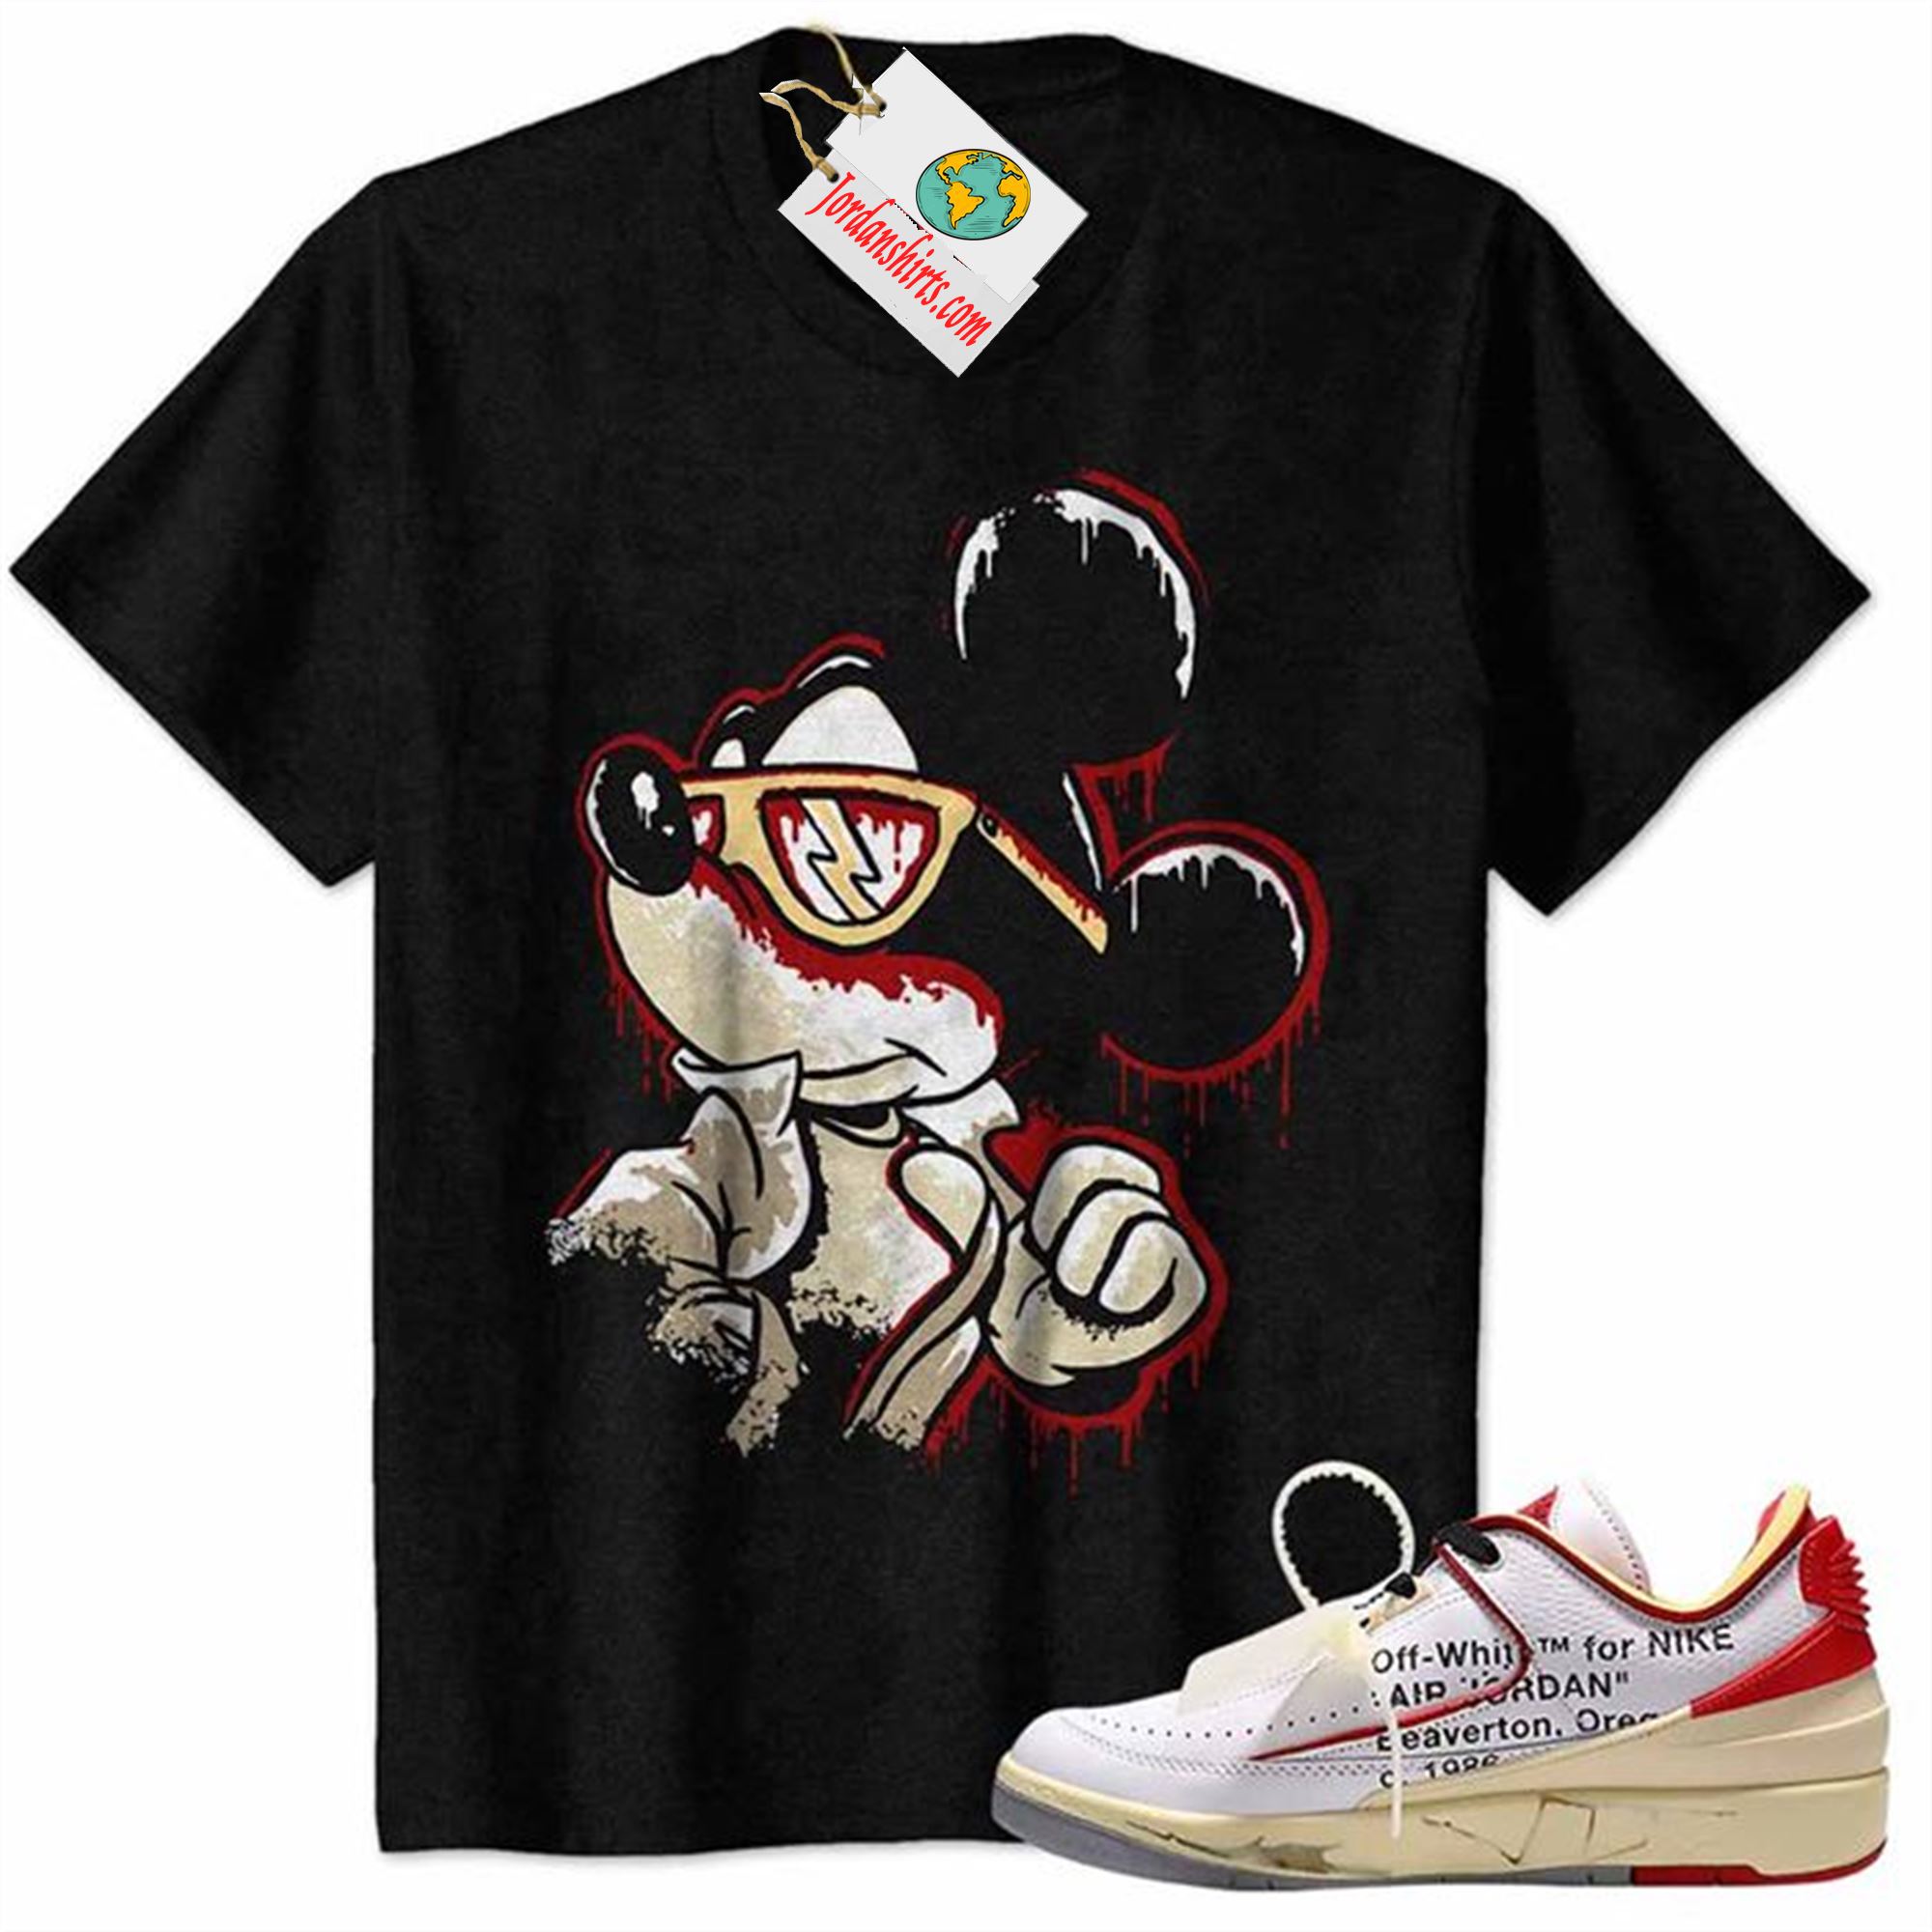 Jordan 2 Shirt, Mickey Dripping Graphic Black Air Jordan 2 Low White Red Off-white 2s Plus Size Up To 5xl